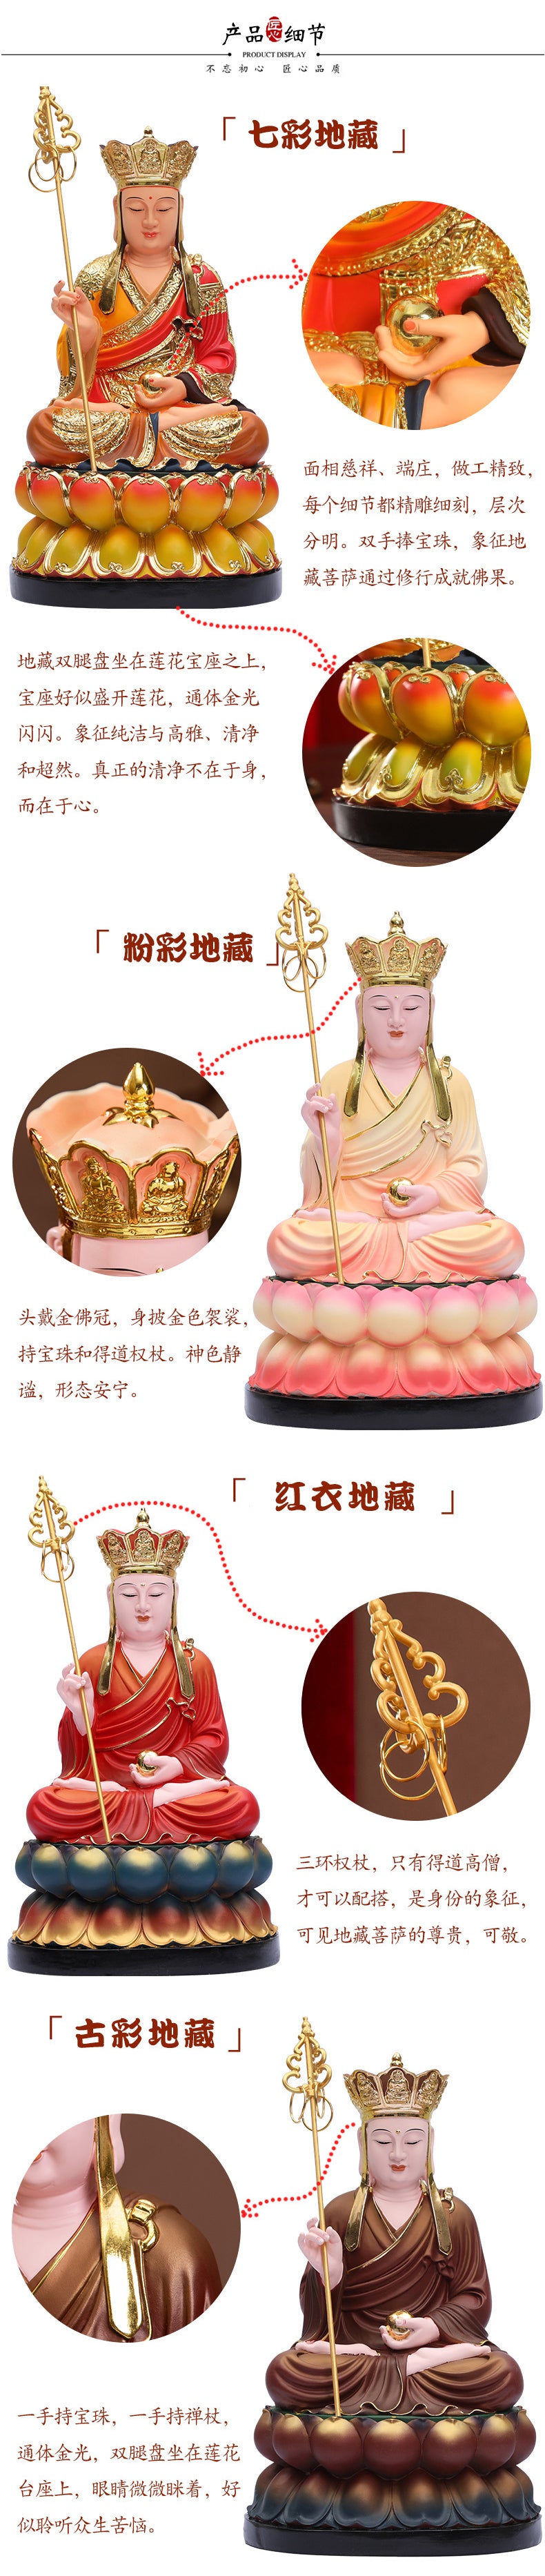 Ksitigarbha, Dizang Wang Bodhisattva Buddha Statue for Sale, Red Clothes Resin Material, Offerings Product Detail Statement-3